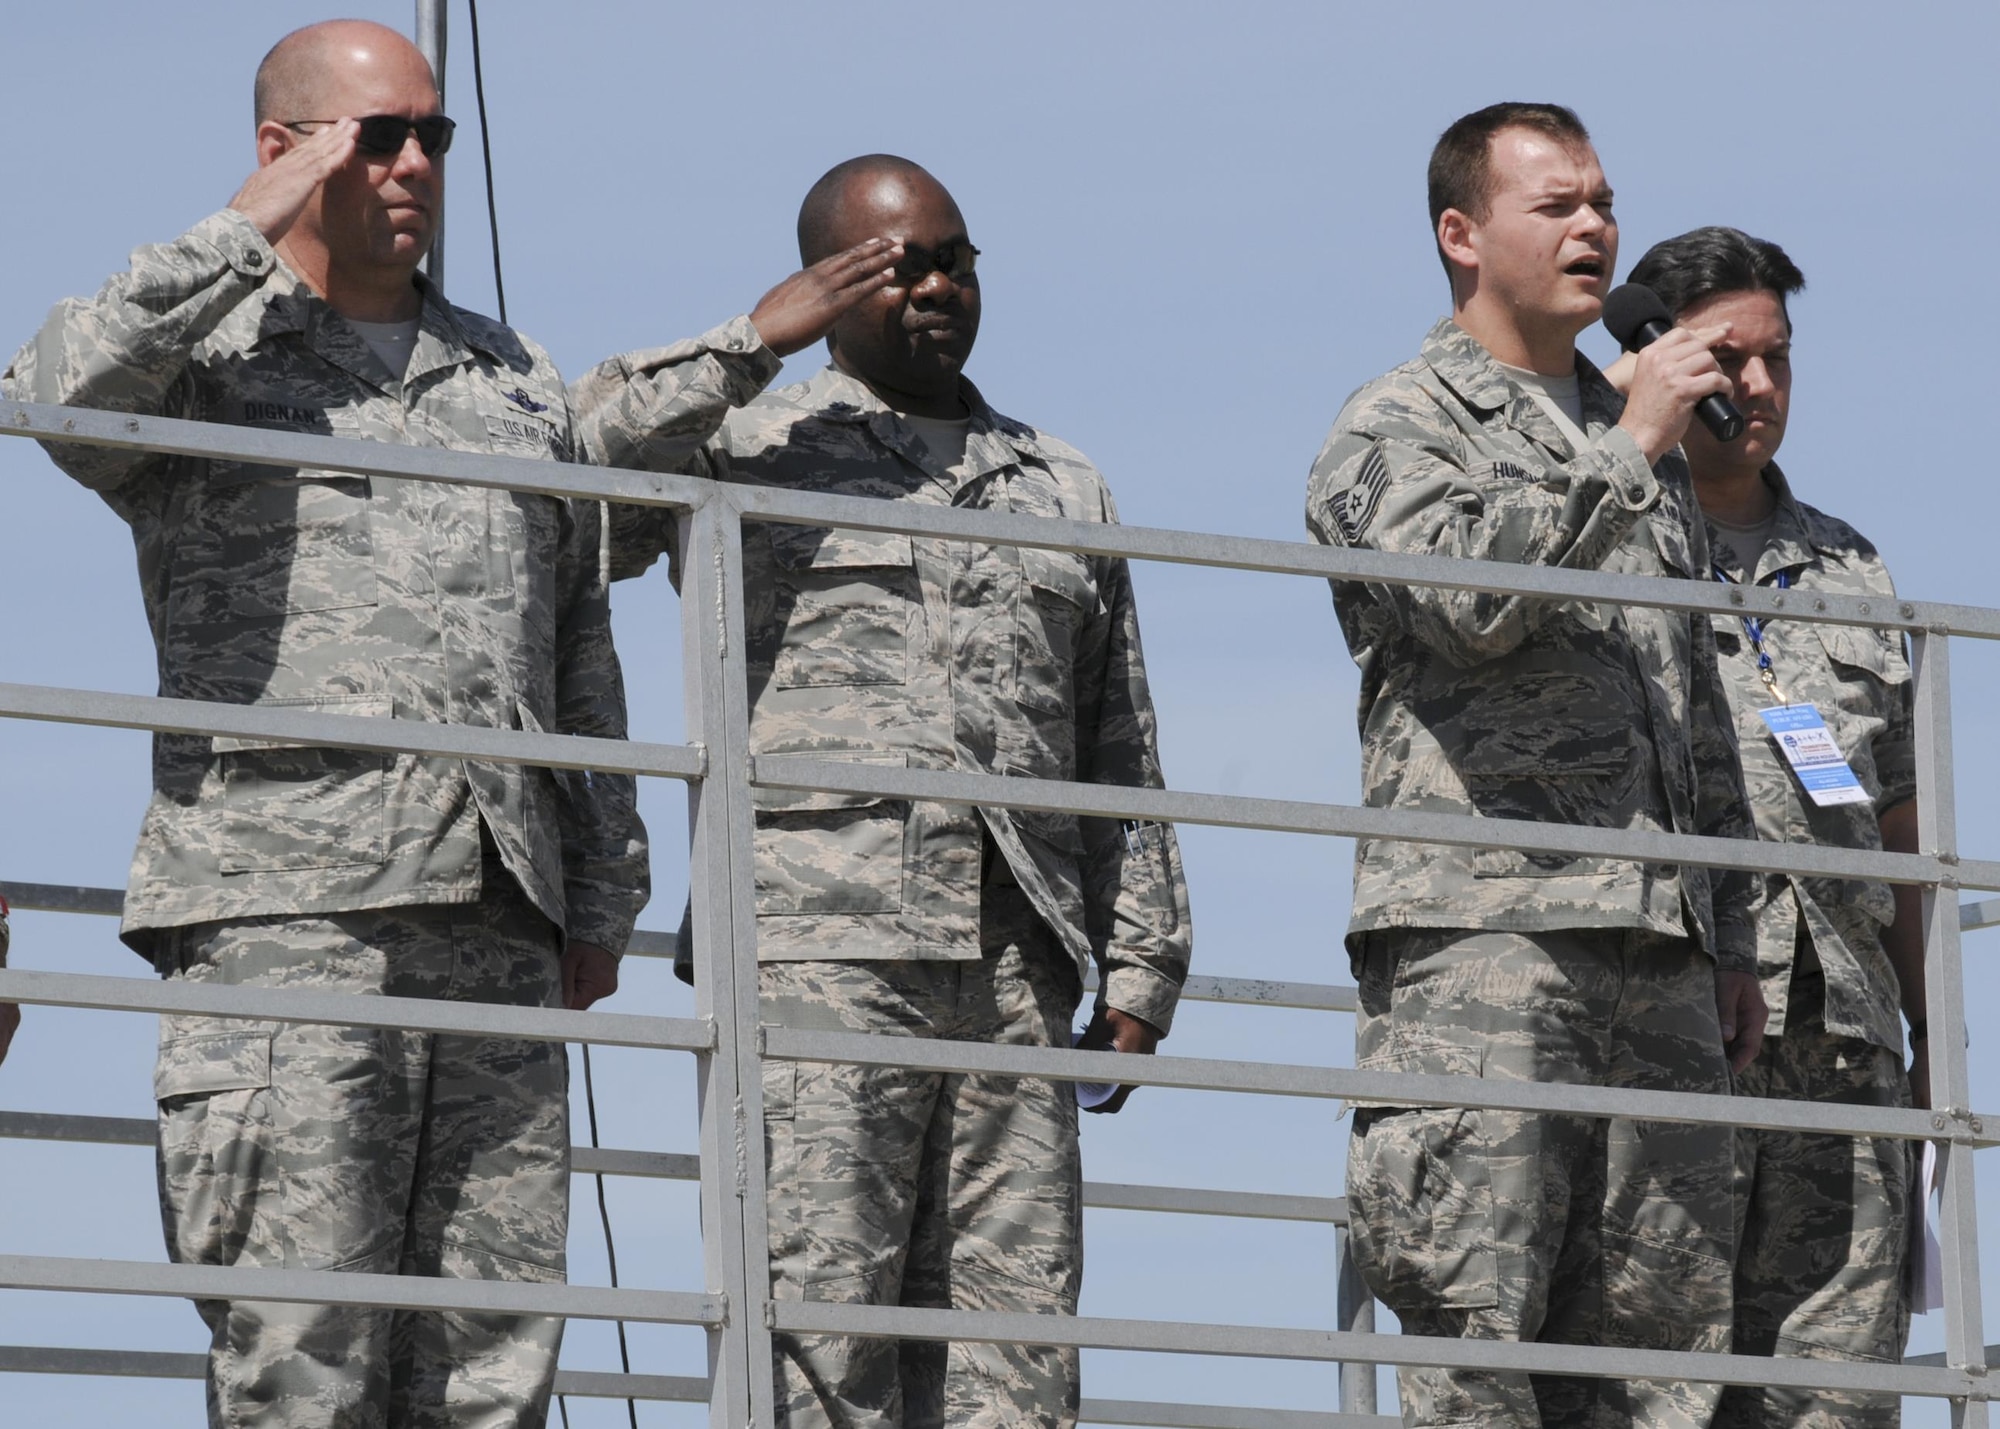 Col. James Dignan, 910th Airlift Wing commander, Lt. Col. Klavens Noel, 910th Airlift Wing chaplain, and Master Sgt. Bob Barko Jr., 910th Airlift Wing Public Affairs superintendent, salute as Tech. Sgt. Marshall Hunsaker, 910th Airlift Wing Public Affairs broadcast journalist, sings the National Anthem during the opening ceremony of the 2016 Youngstown Air Reserve Station Open House here, June 18. The open house drew approximately 7000 guests to see the equipment, mission and personnel of YARS. (U.S. Air Force photo/Tech. Sgt. Rick Lisum)